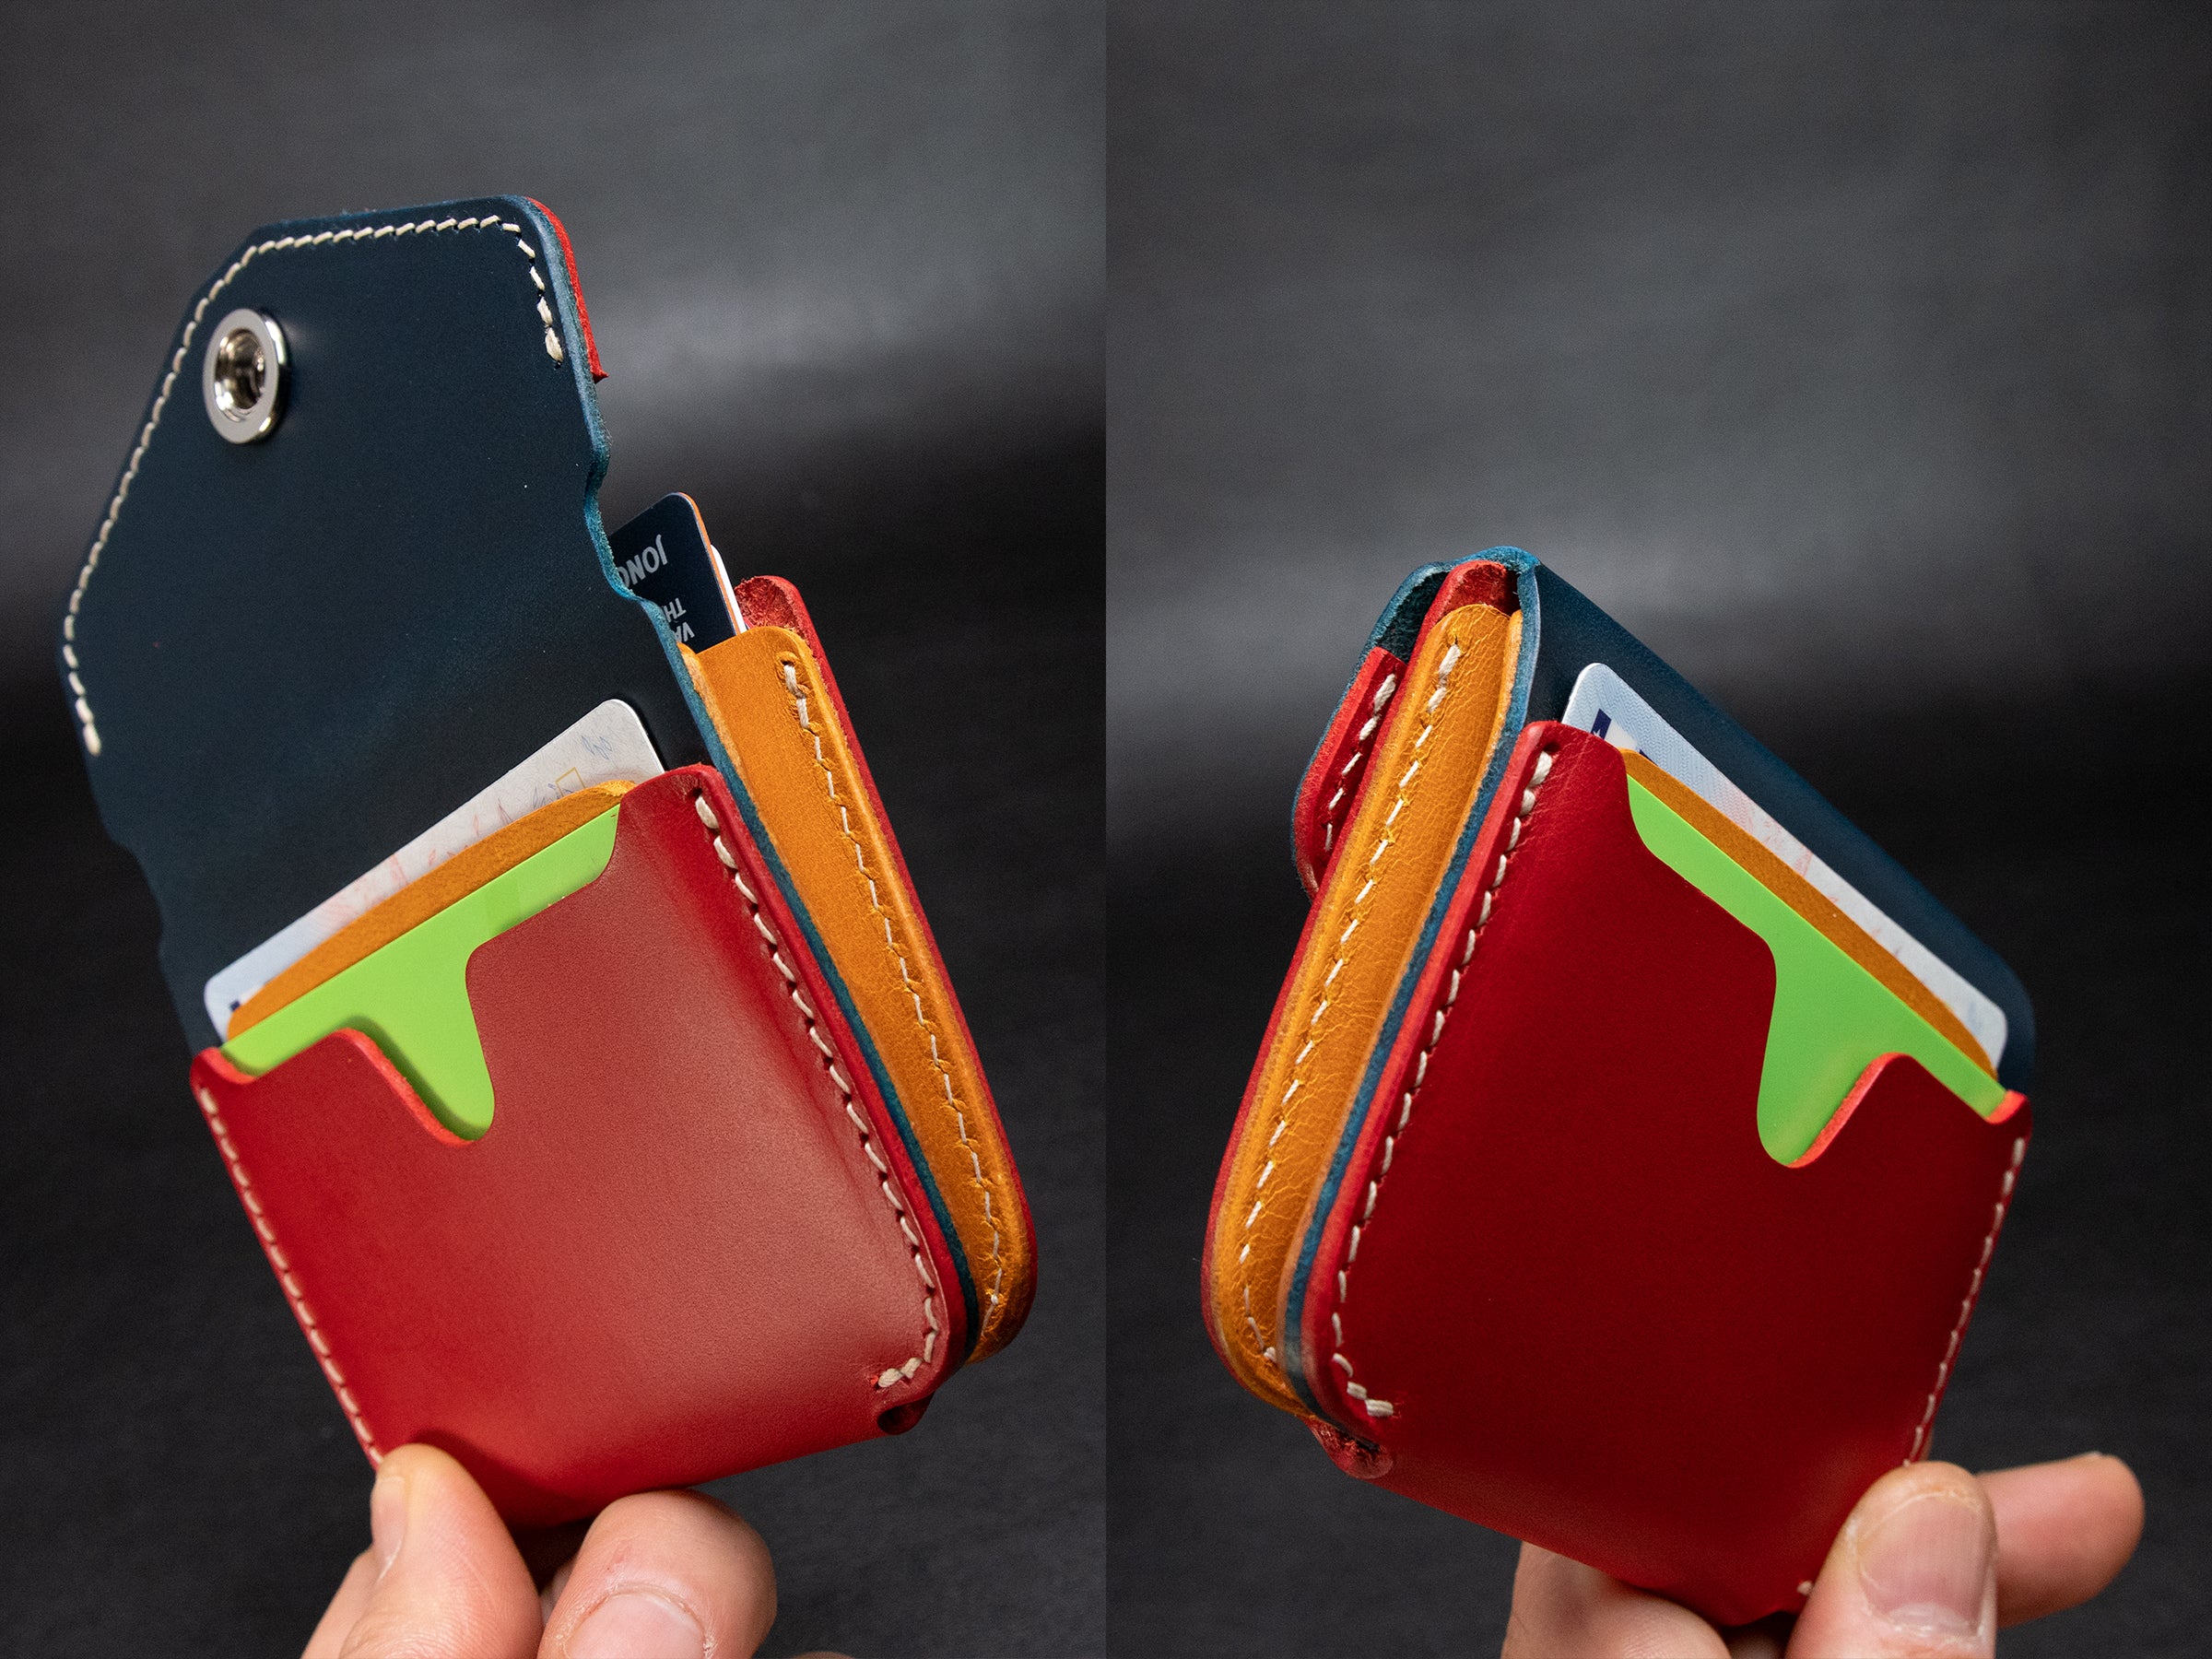 AirTag Leather Wallet [TW-RN]  - Card Holder - Premium Italian Veg-Tanned Leather - Personalized Stamp - Handcrafted in USA